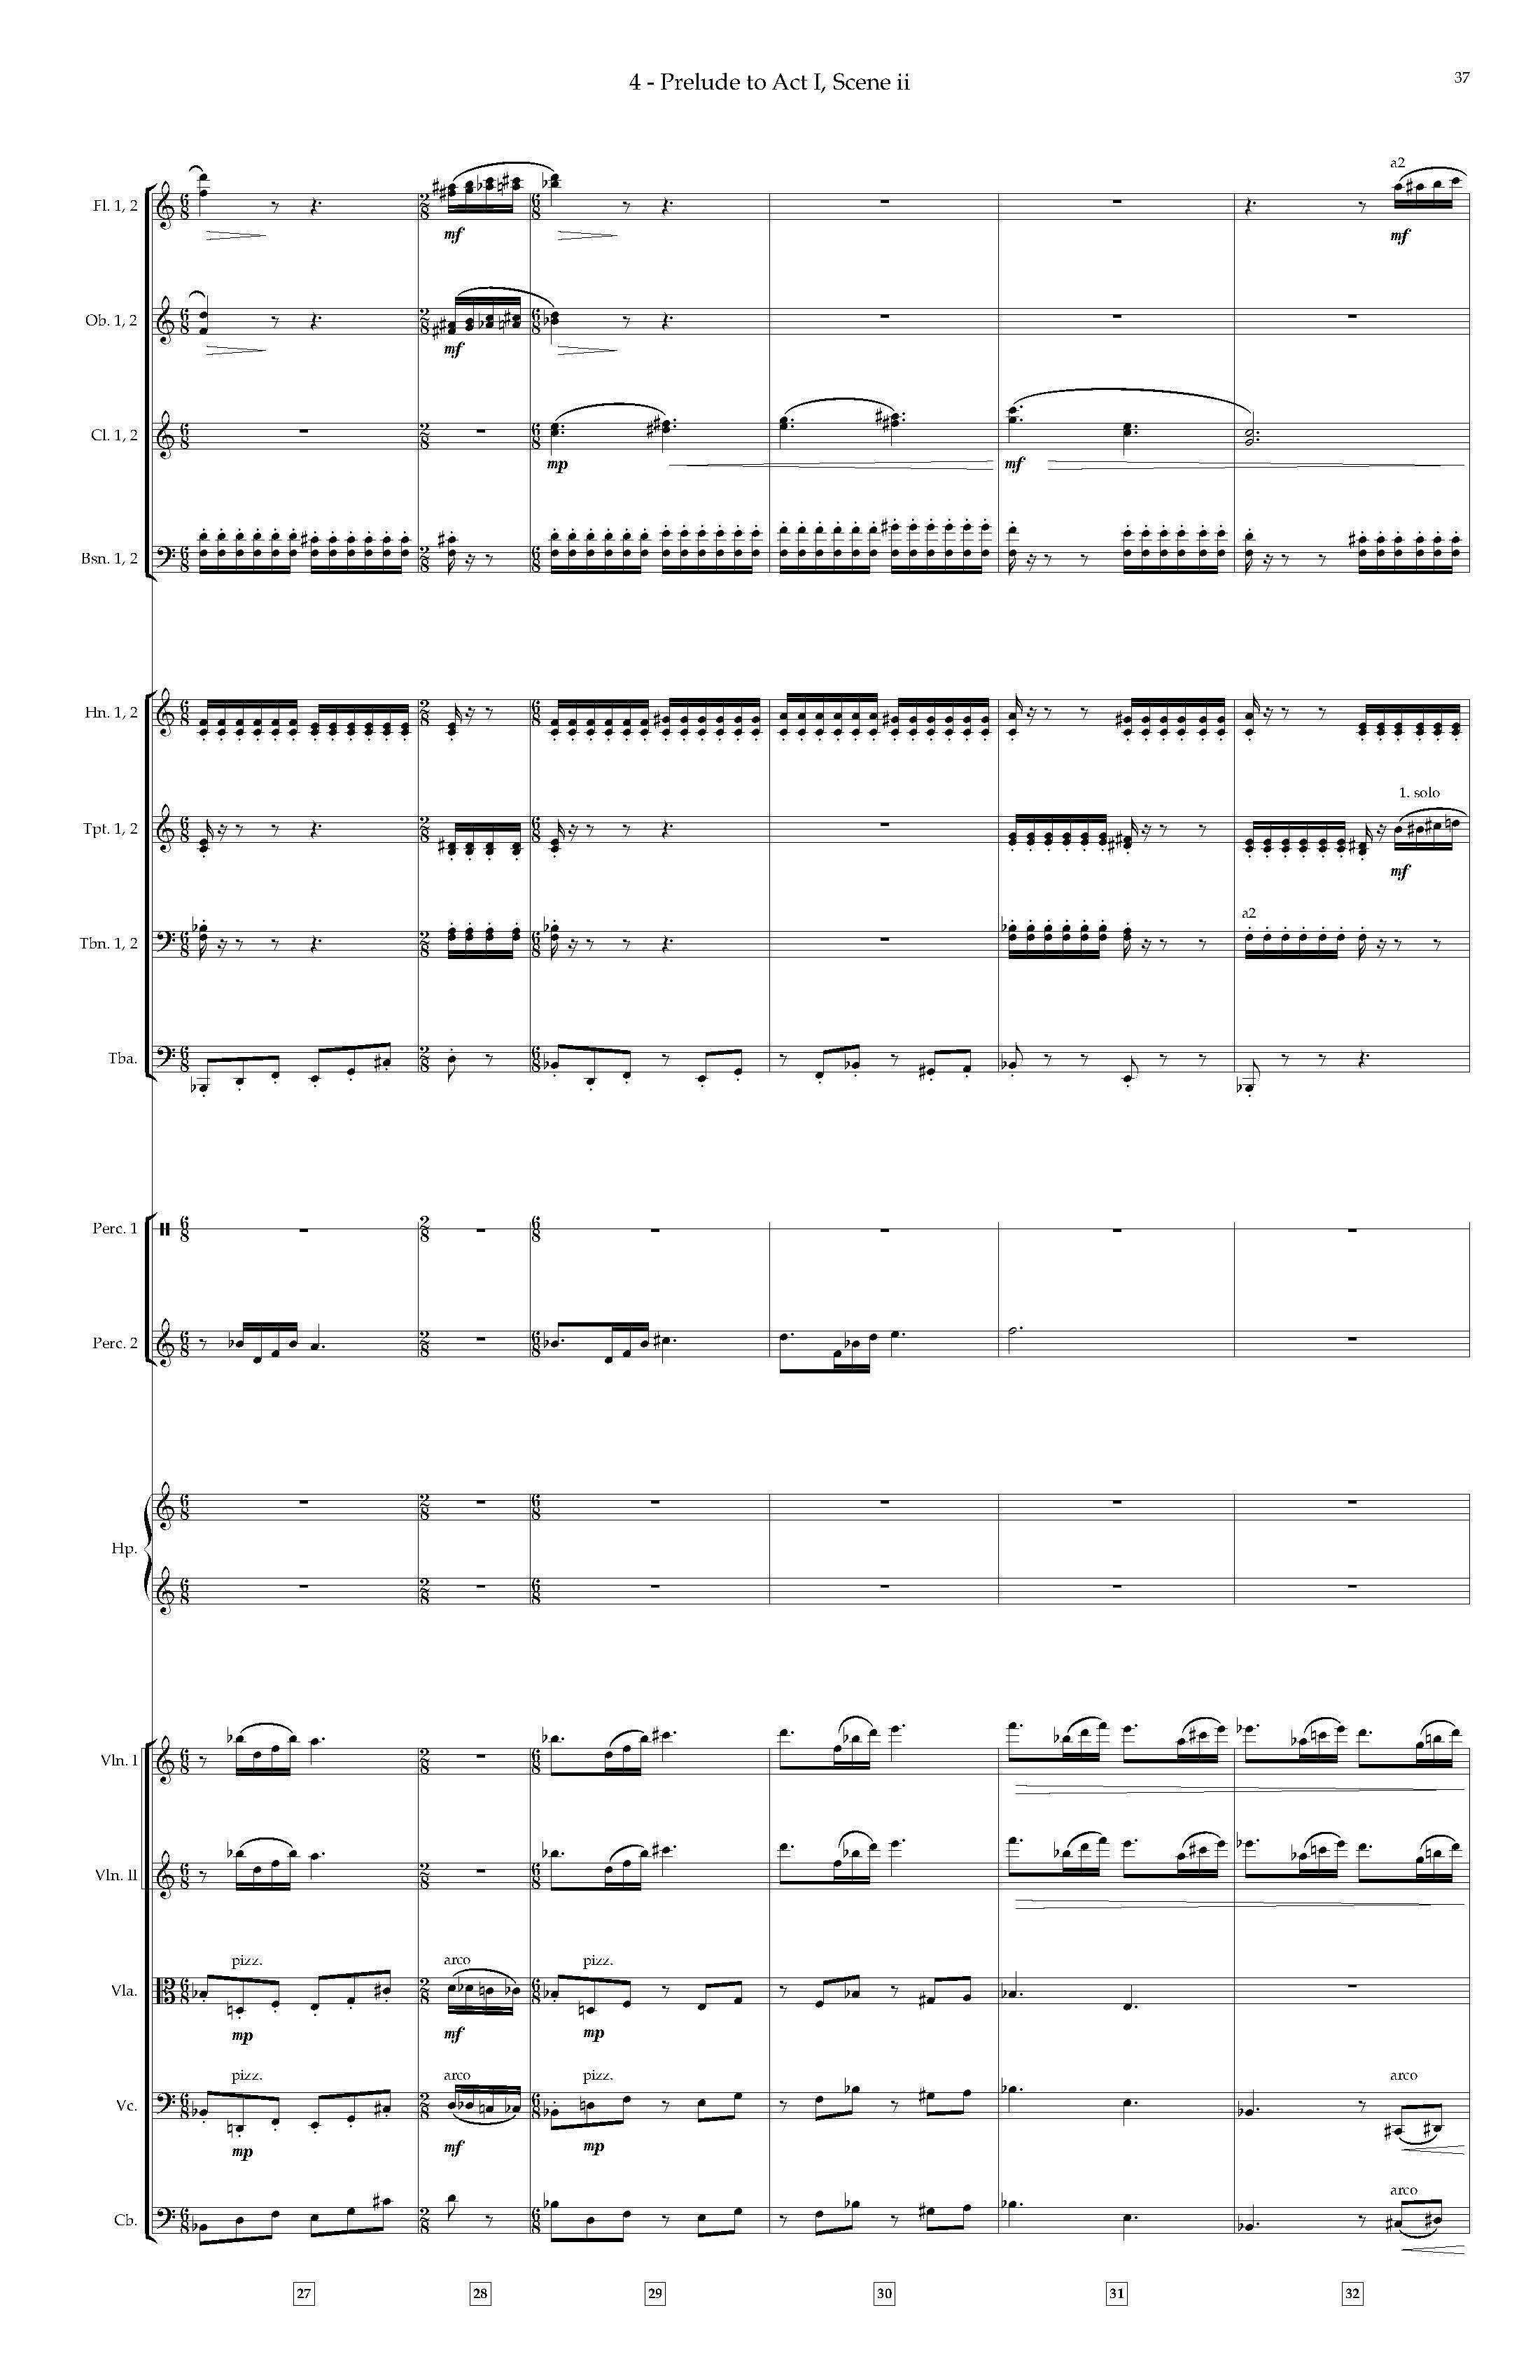 Arias and Interludes from HWGS - Complete Score_Page_43.jpg